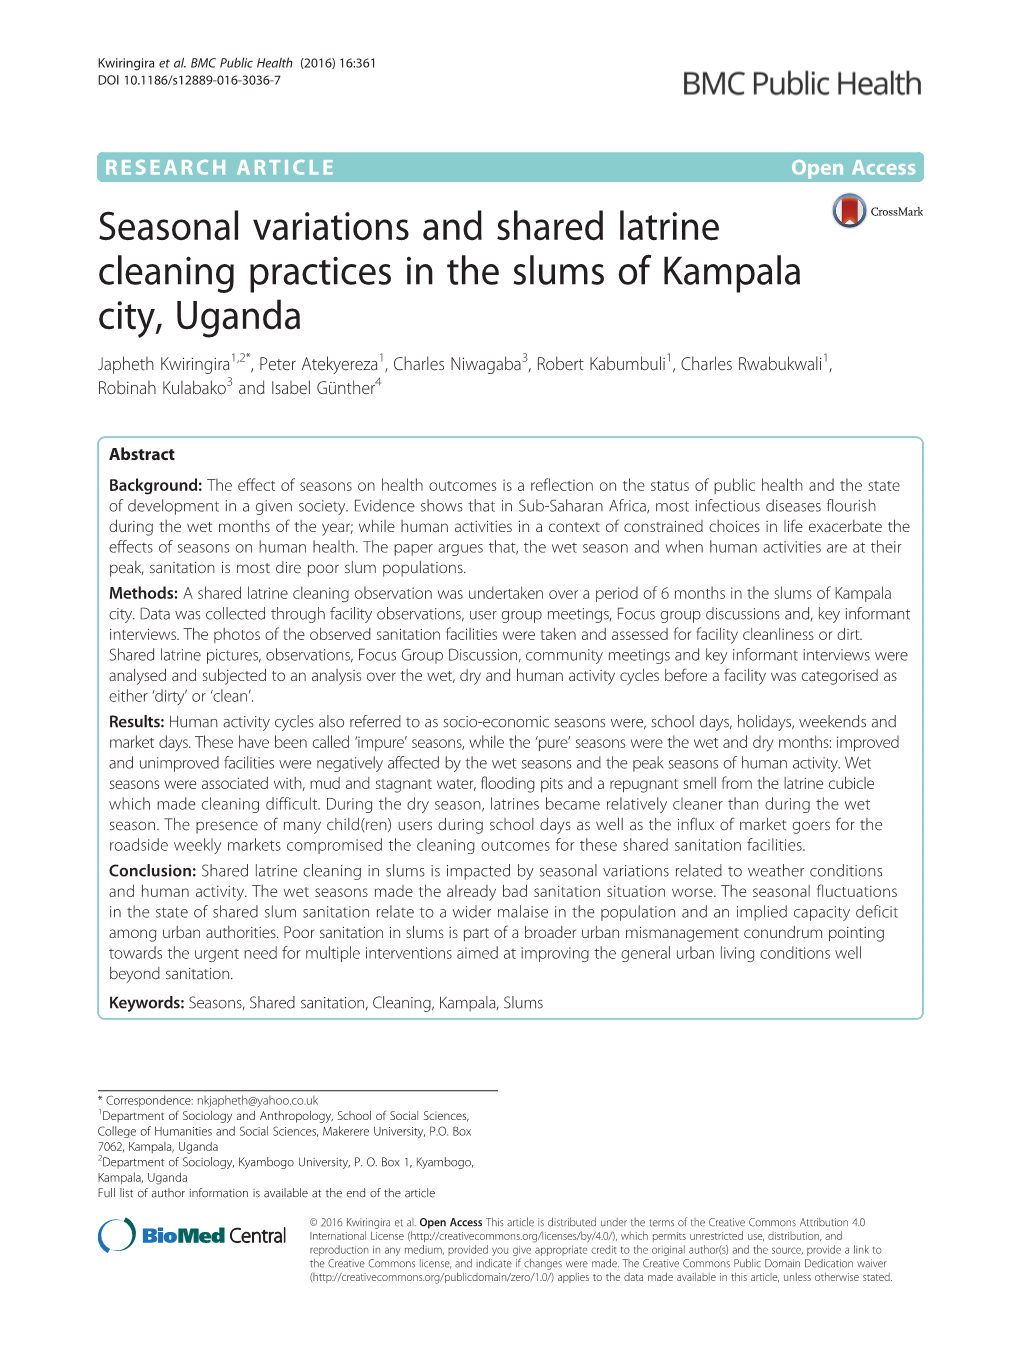 Seasonal Variations and Shared Latrine Cleaning Practices in The